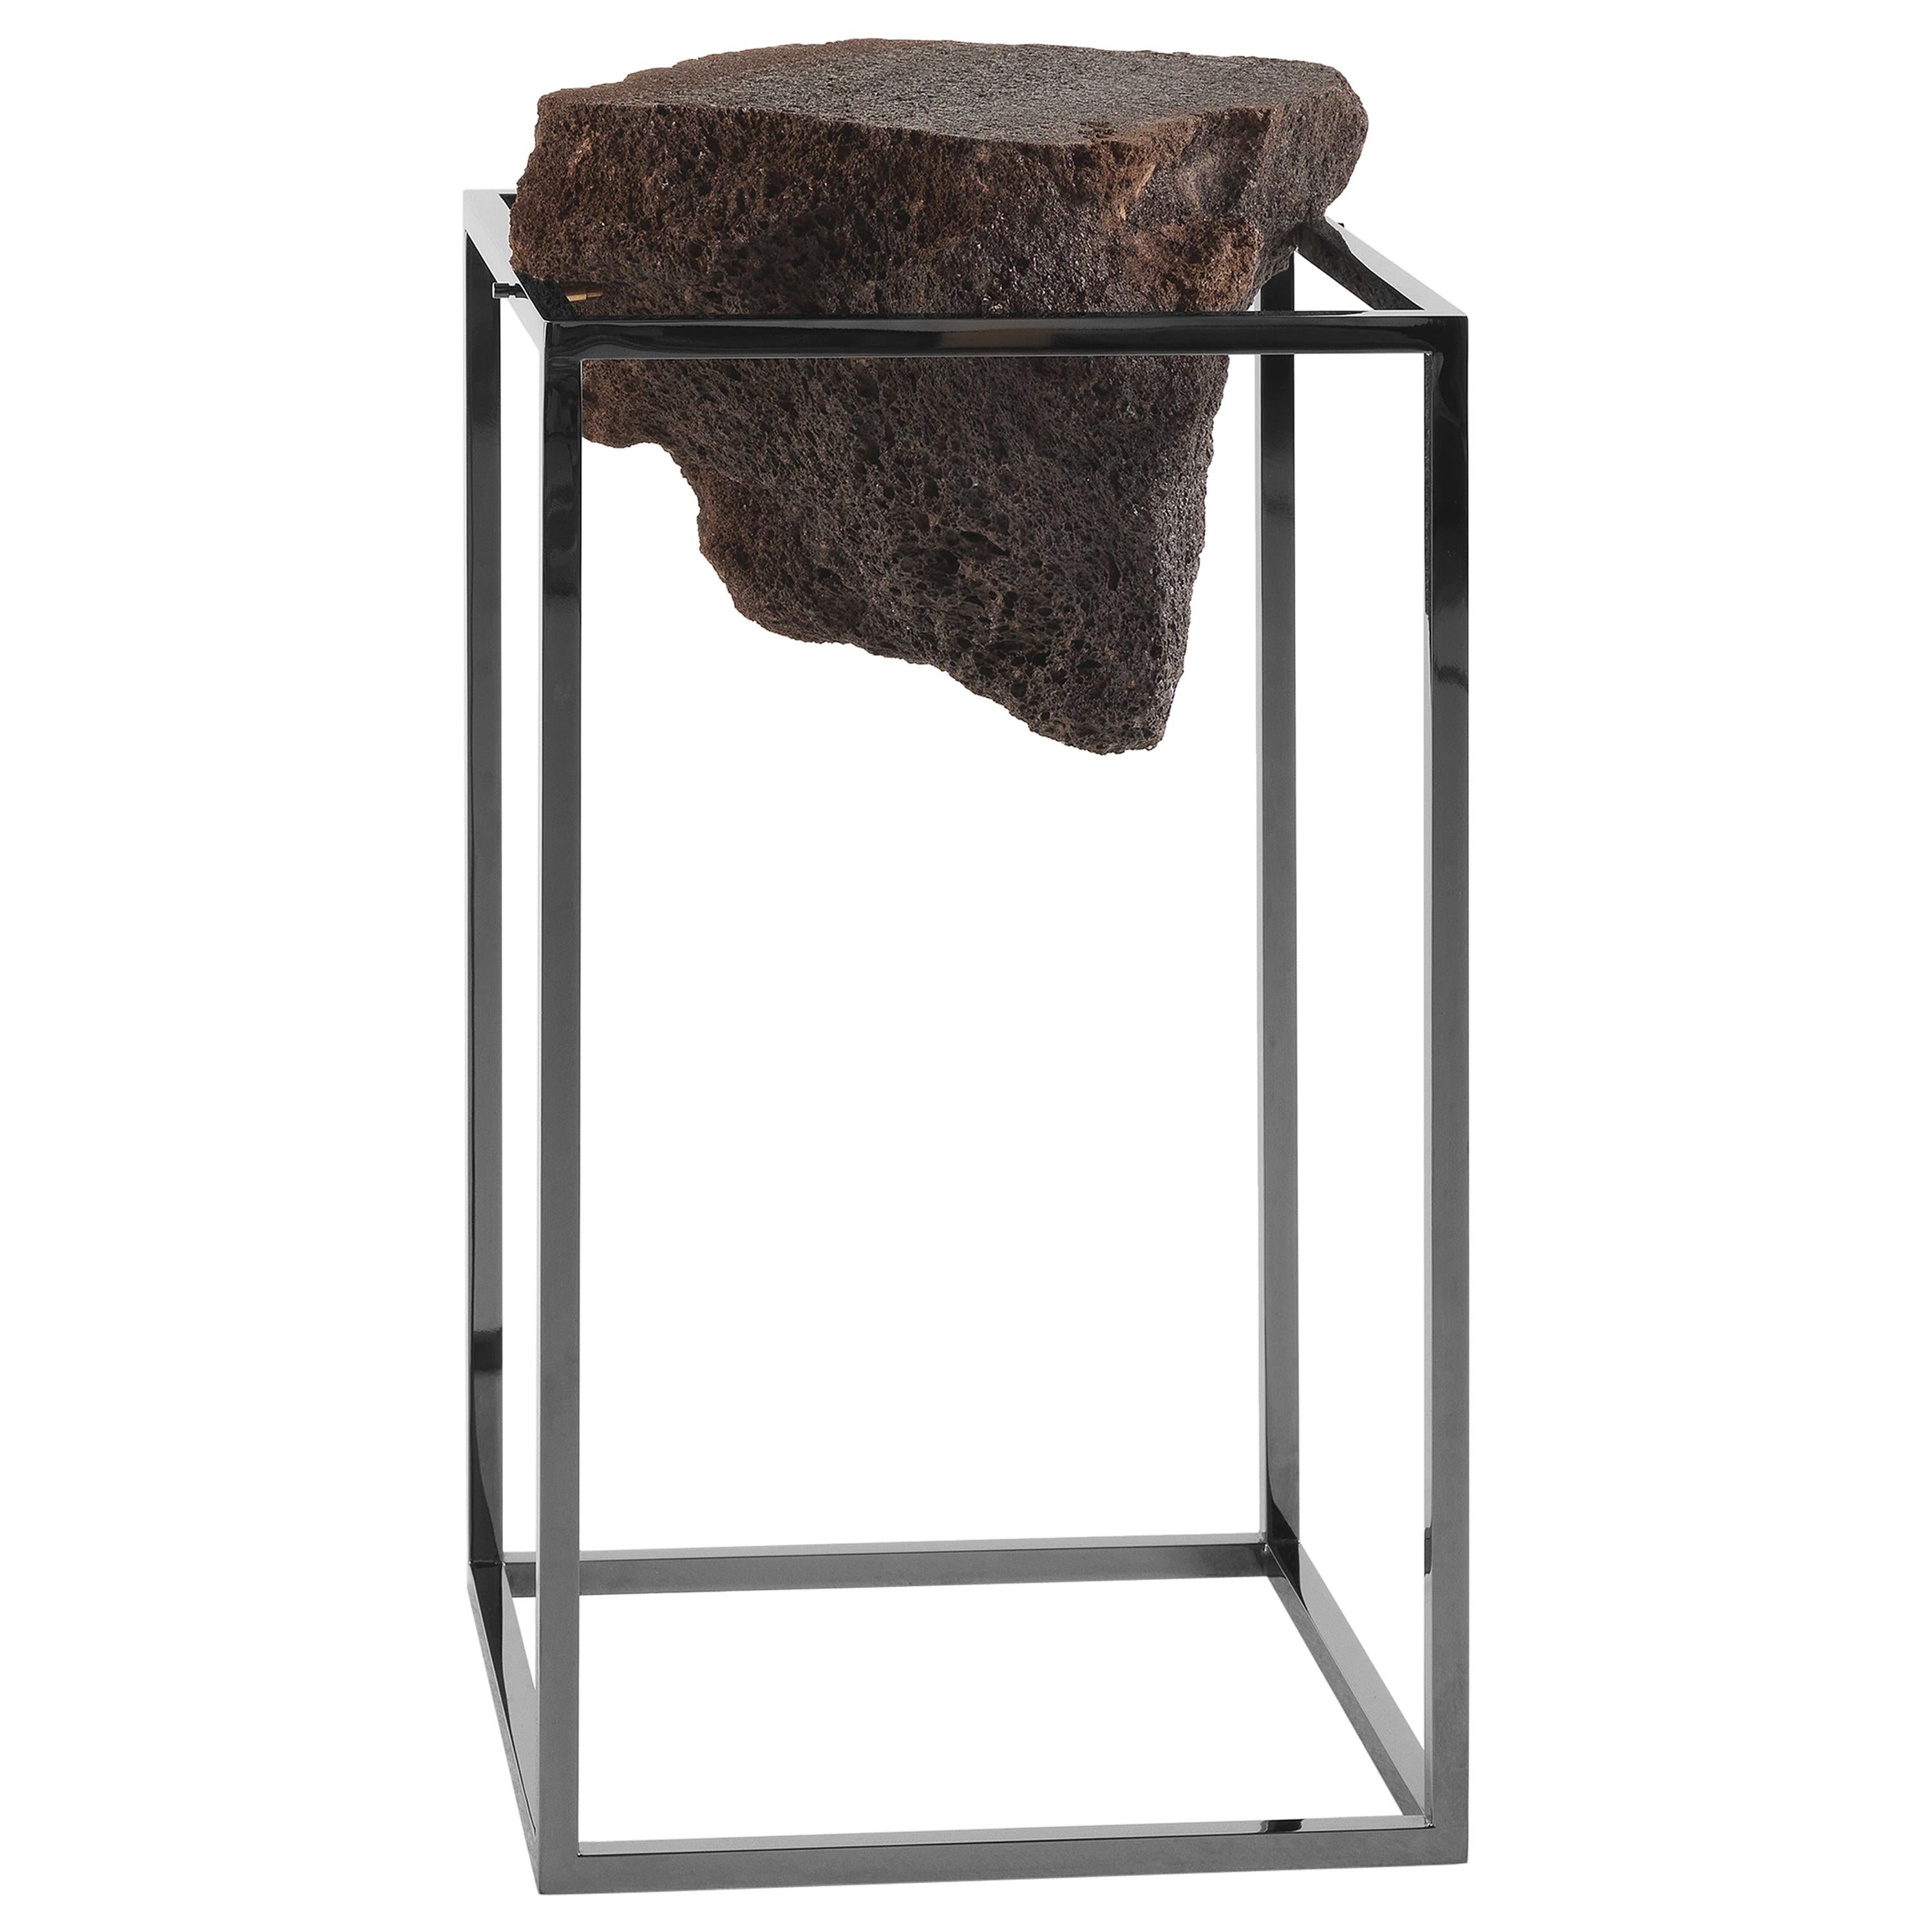 For Sale: Black (Chrome Black) 21st Century Antivol Large Side Table in Brass and Natural Lava Stone by CTRLZAK